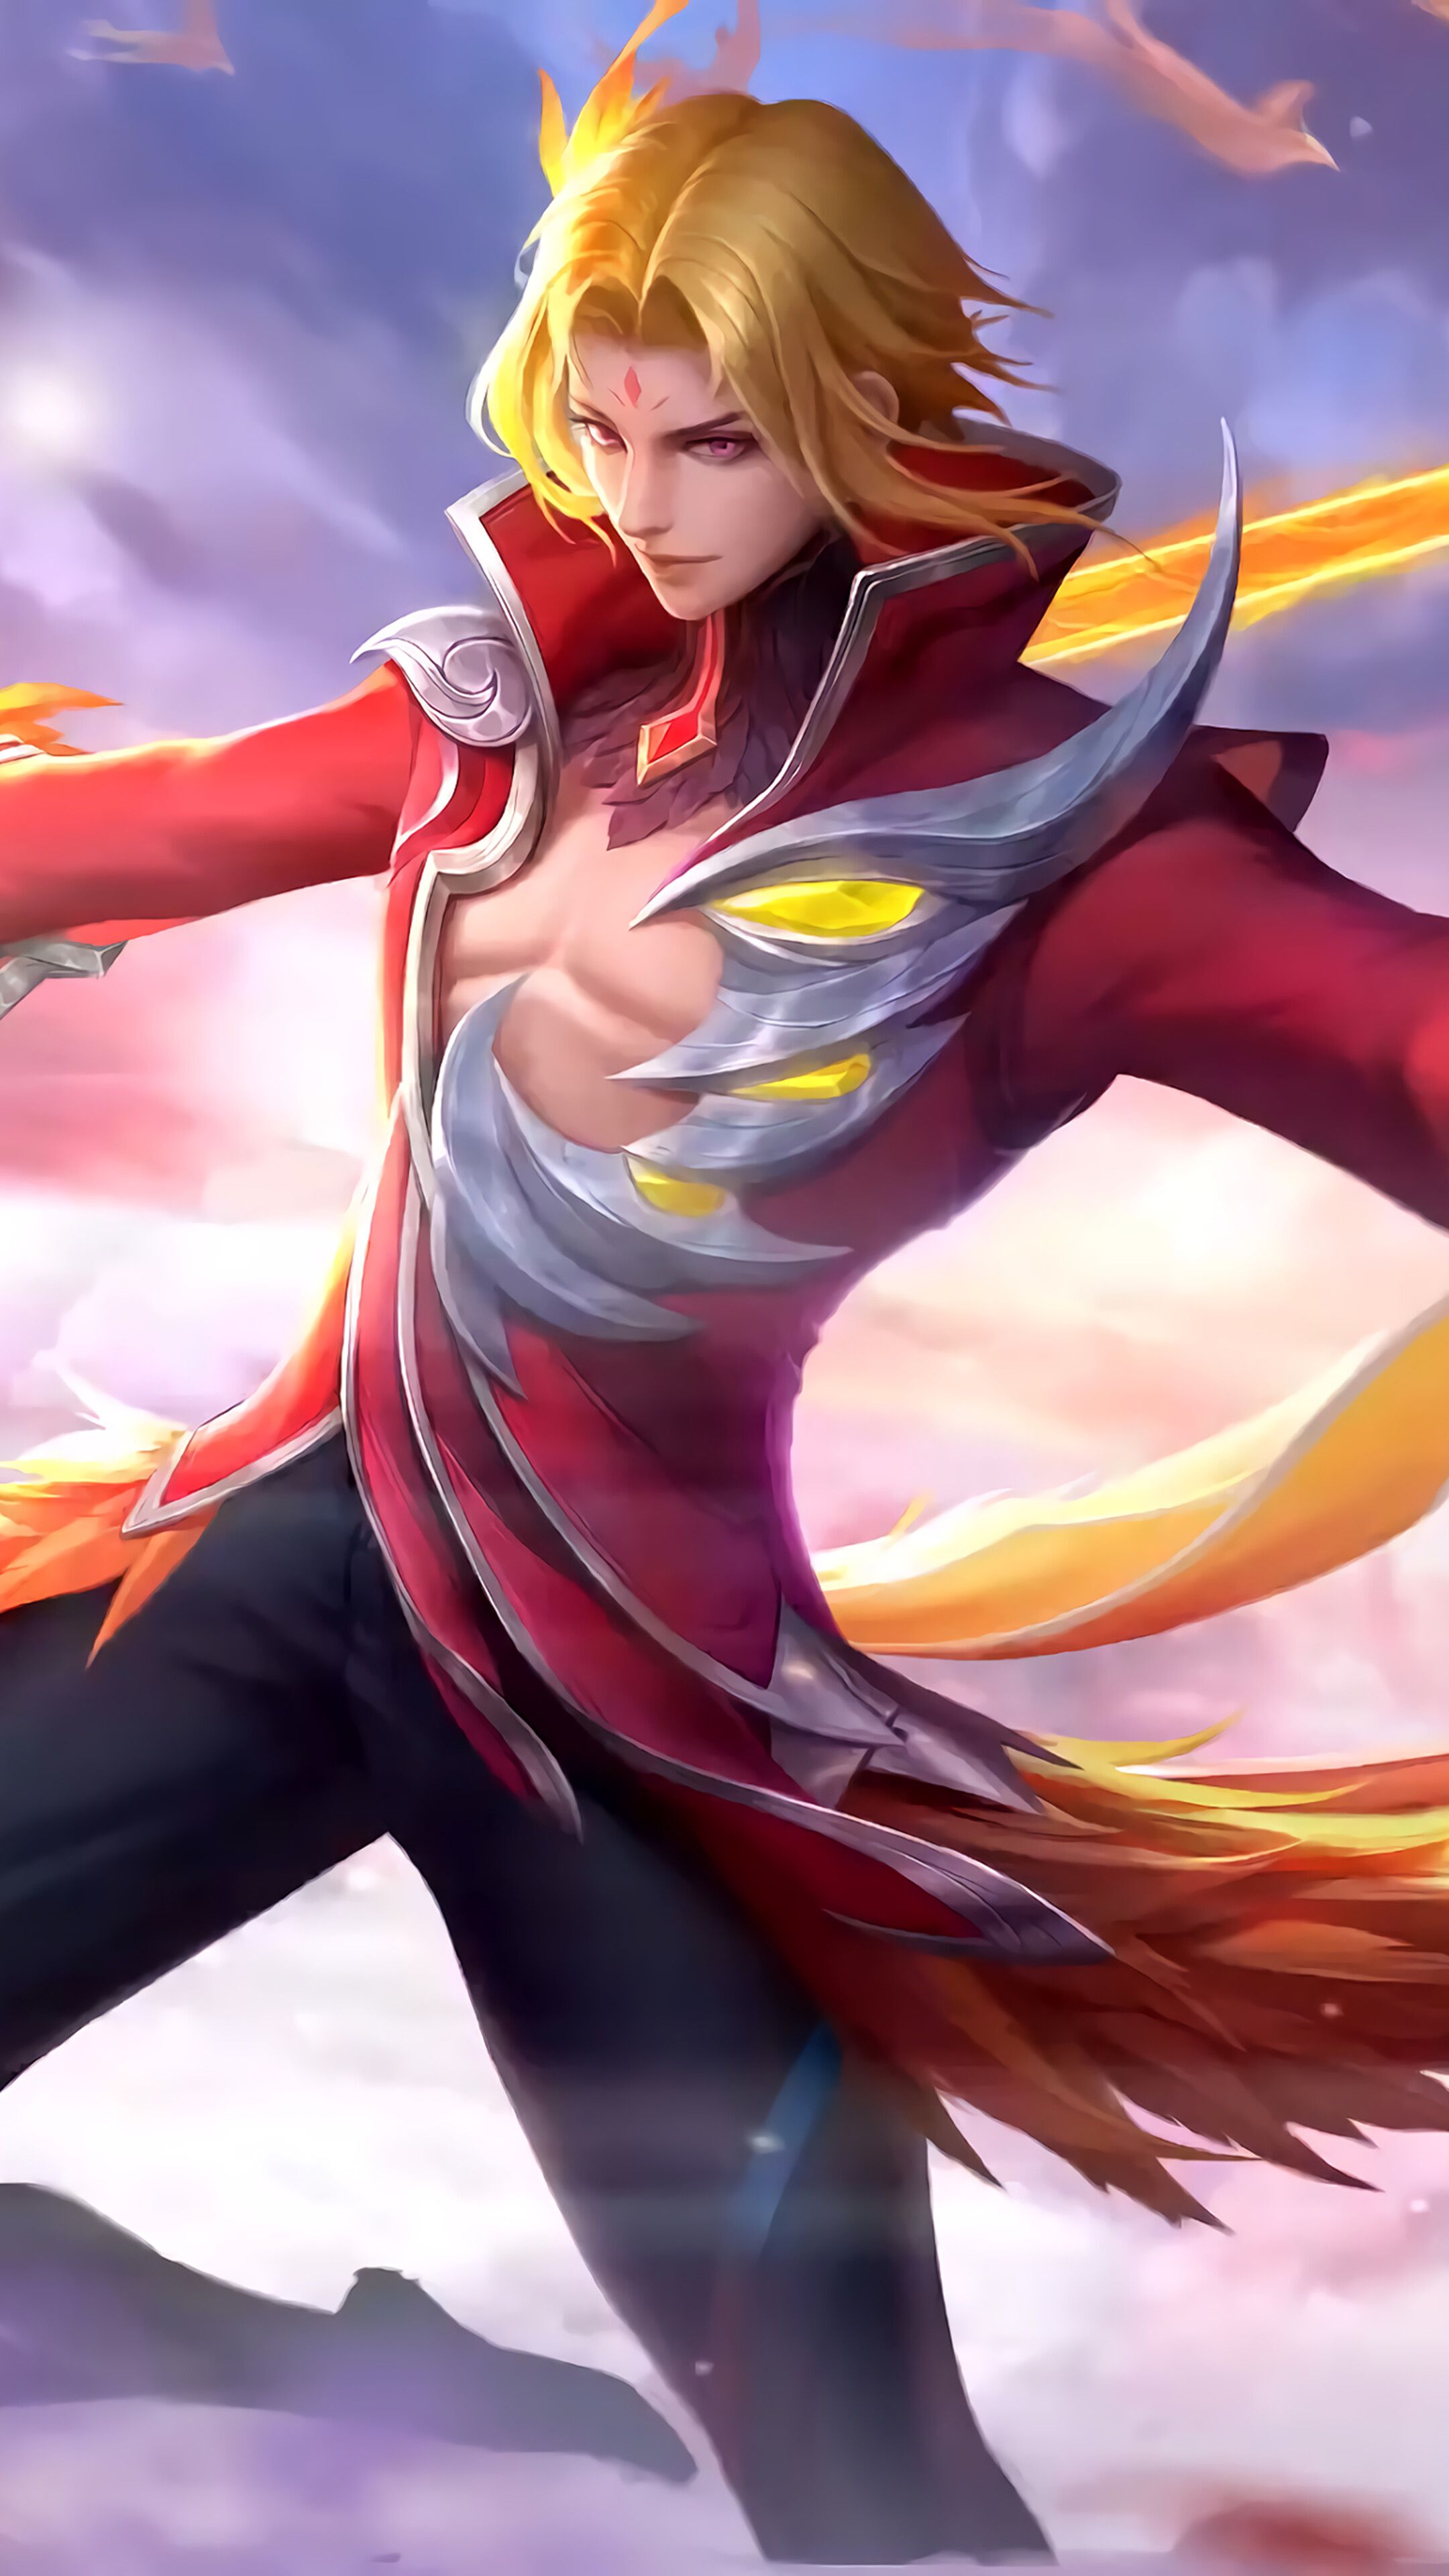 Ling, Fiery Dance, Skin, Mobile Legends, 4K phone HD Wallpaper, Image, Background, Photo and Picture. Mocah HD Wallpaper